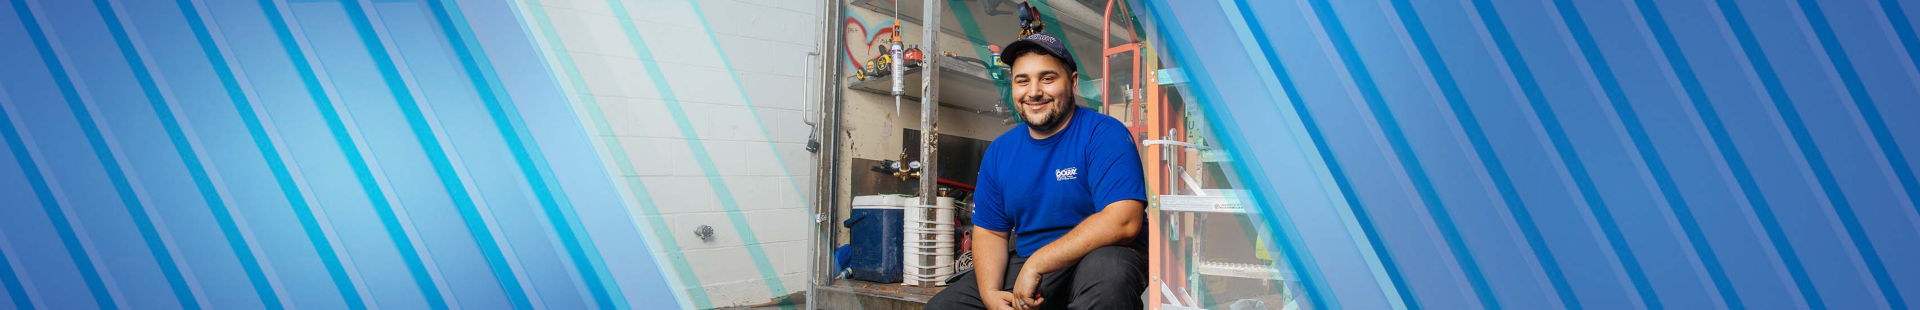 Smiling Coolray HVAC technician